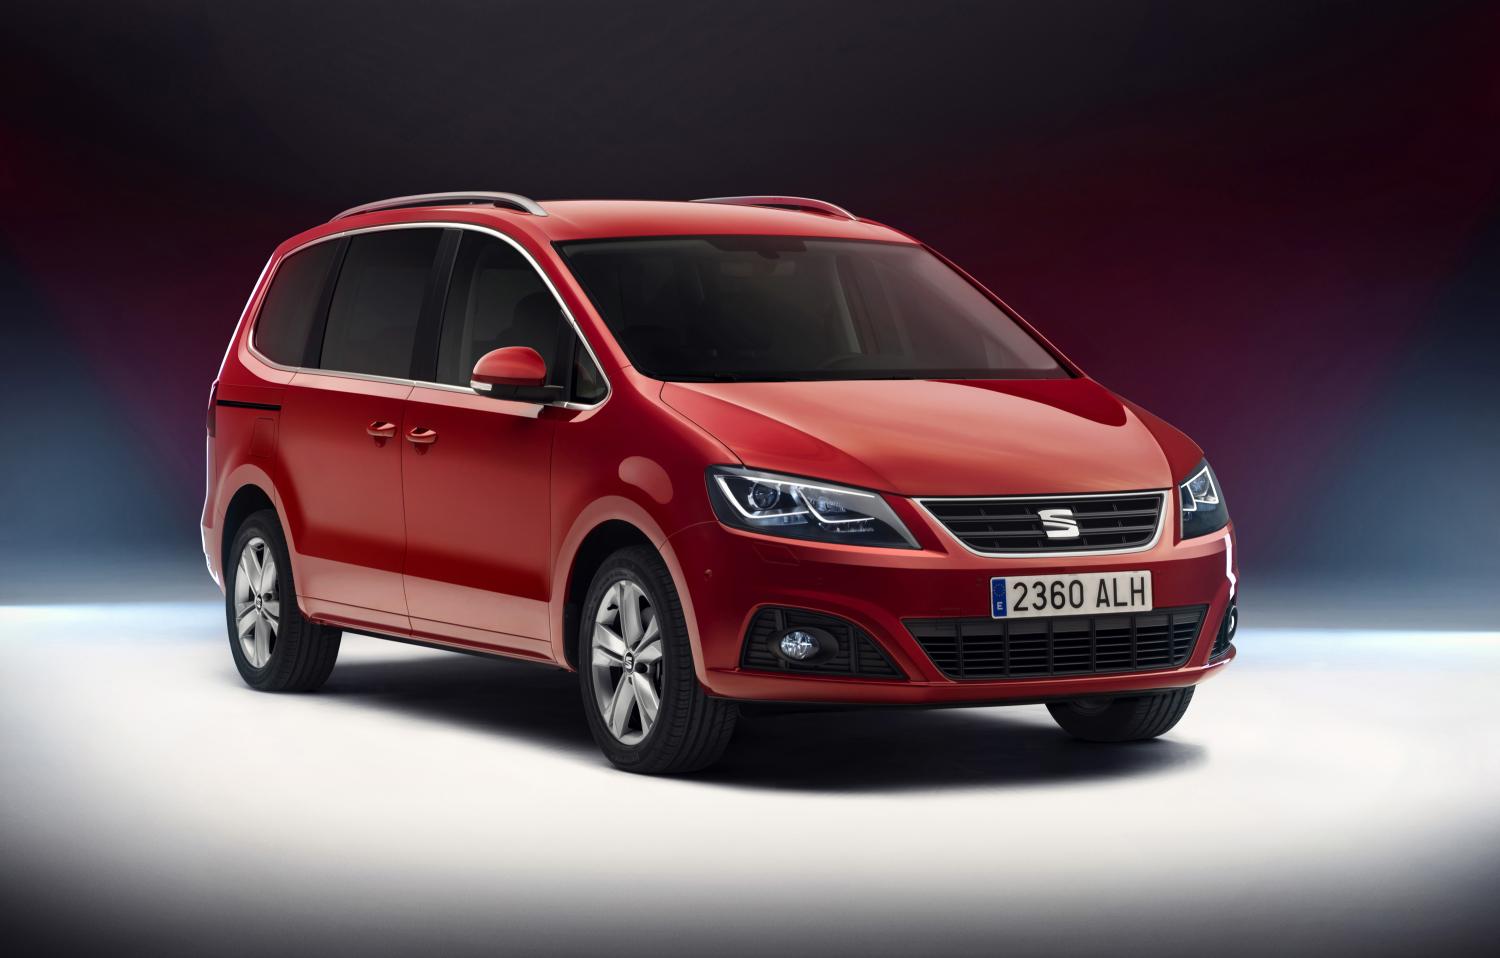 Another MPV Discontinued Because European Demand Shifts Towards